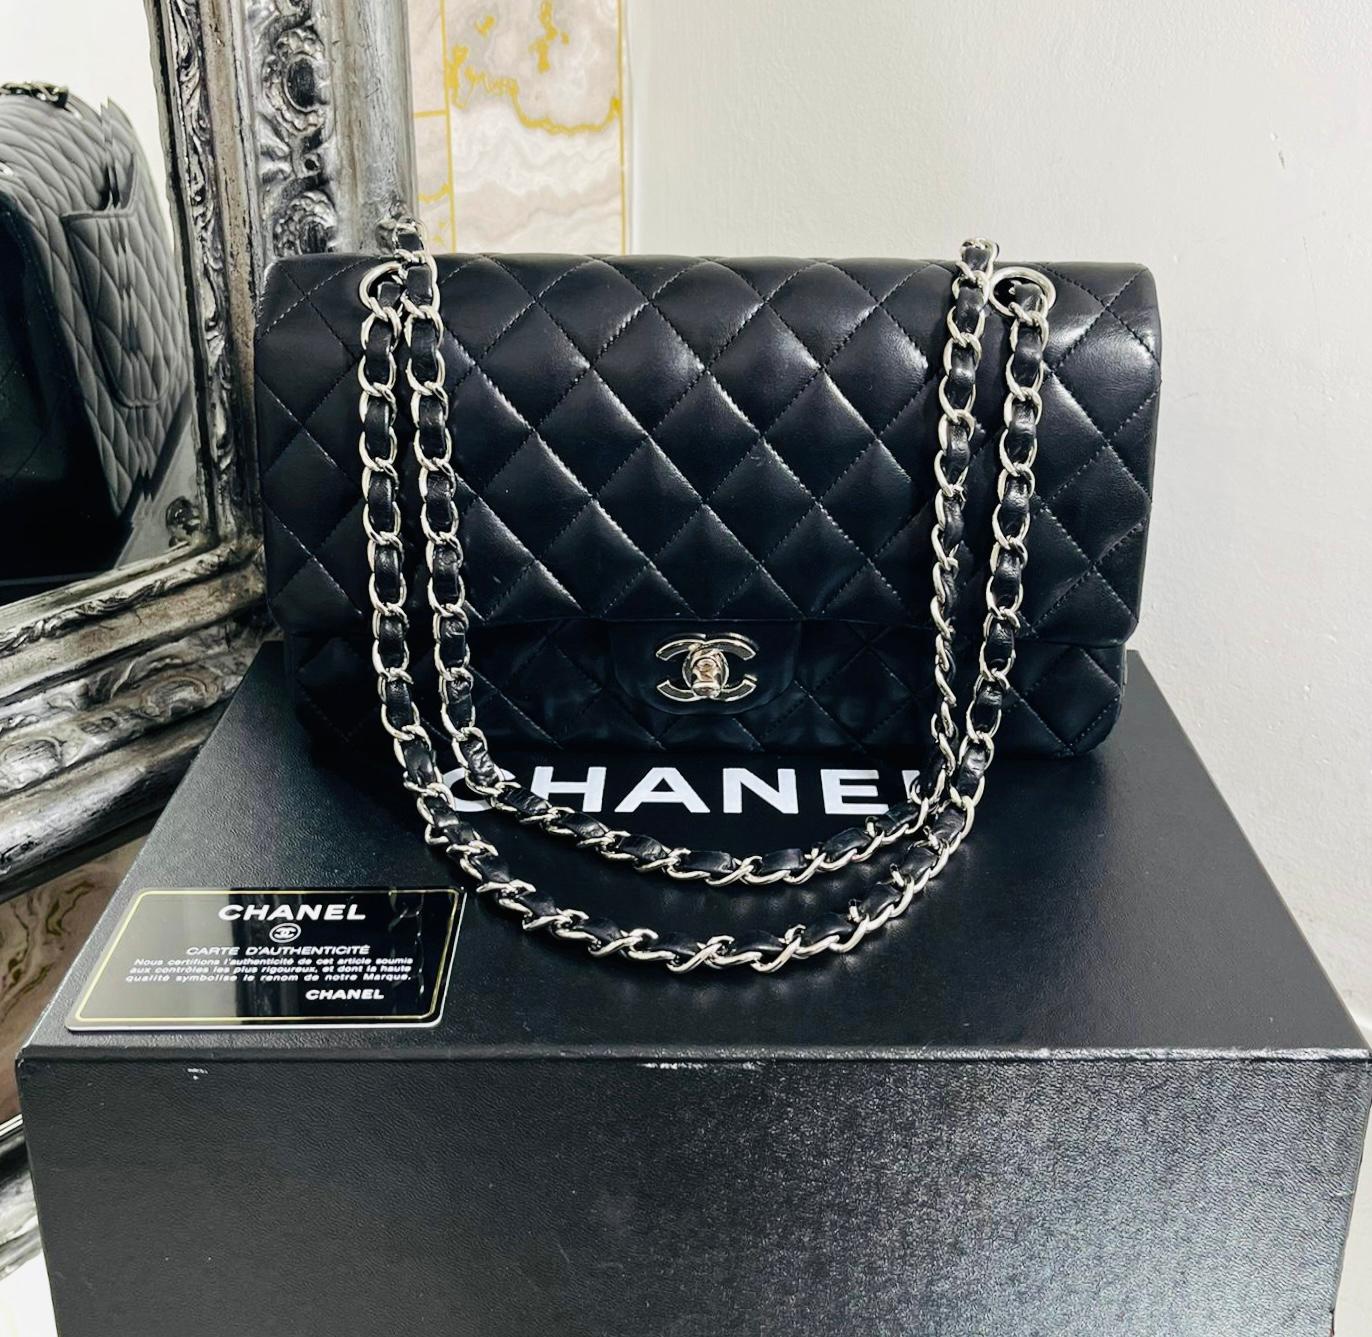 Chanel Timeless Double Flap Leather Bag

Soft body, black bag designed with iconic diamond quilting and double flap with zipped pocket.

Detailed with Chanel’s signature interlocking ‘CC’ turn-lock fastening with leather and chain link shoulder